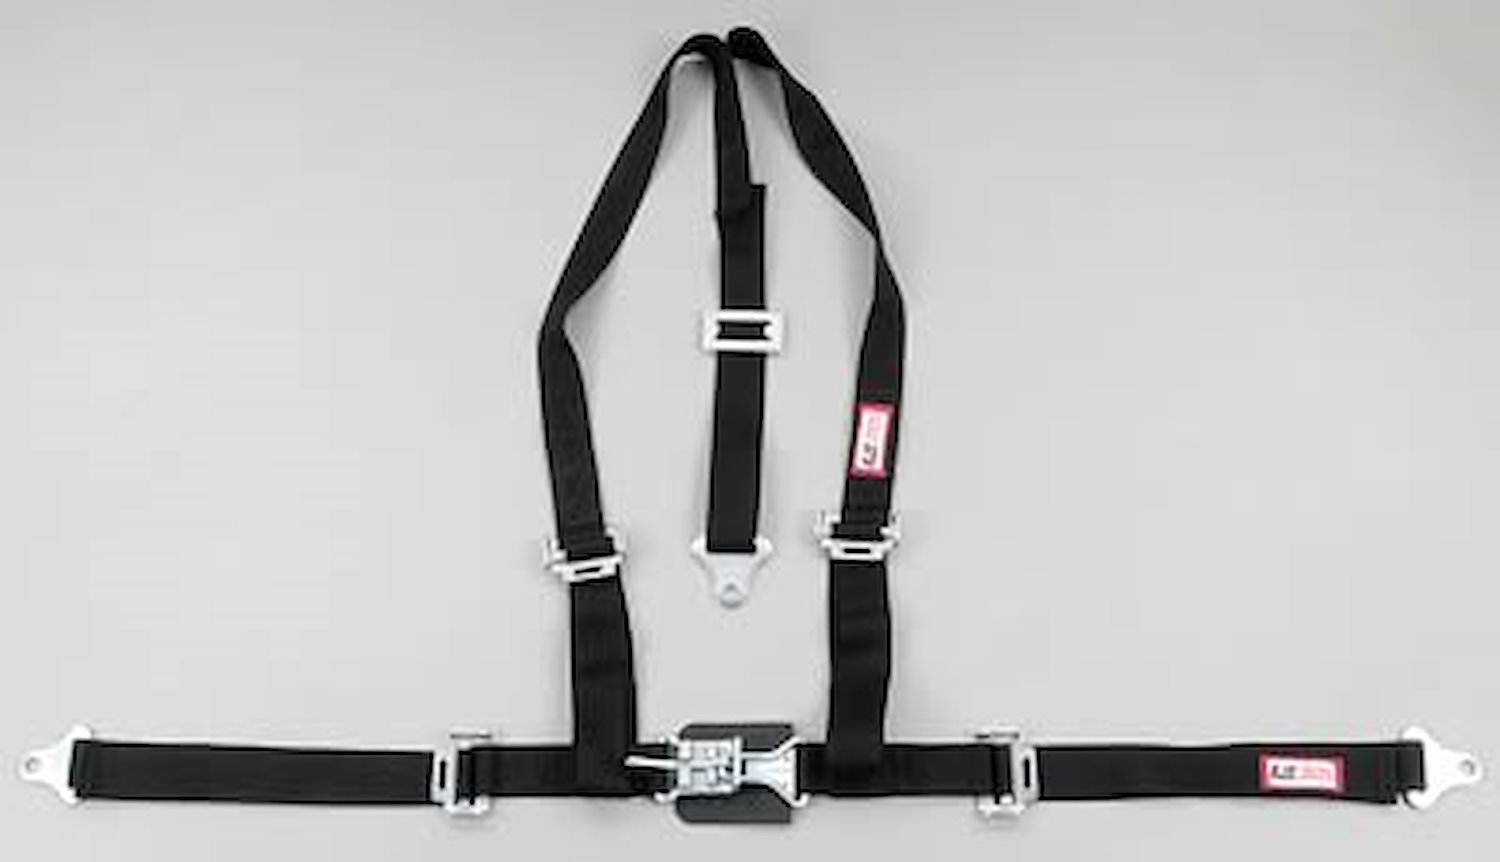 NON-SFI L&L HARNESS 2 PULL DOWN Lap Belt SEWN IN 2 S.H. V ROLL BAR Mount ALL WRAP ENDS RED